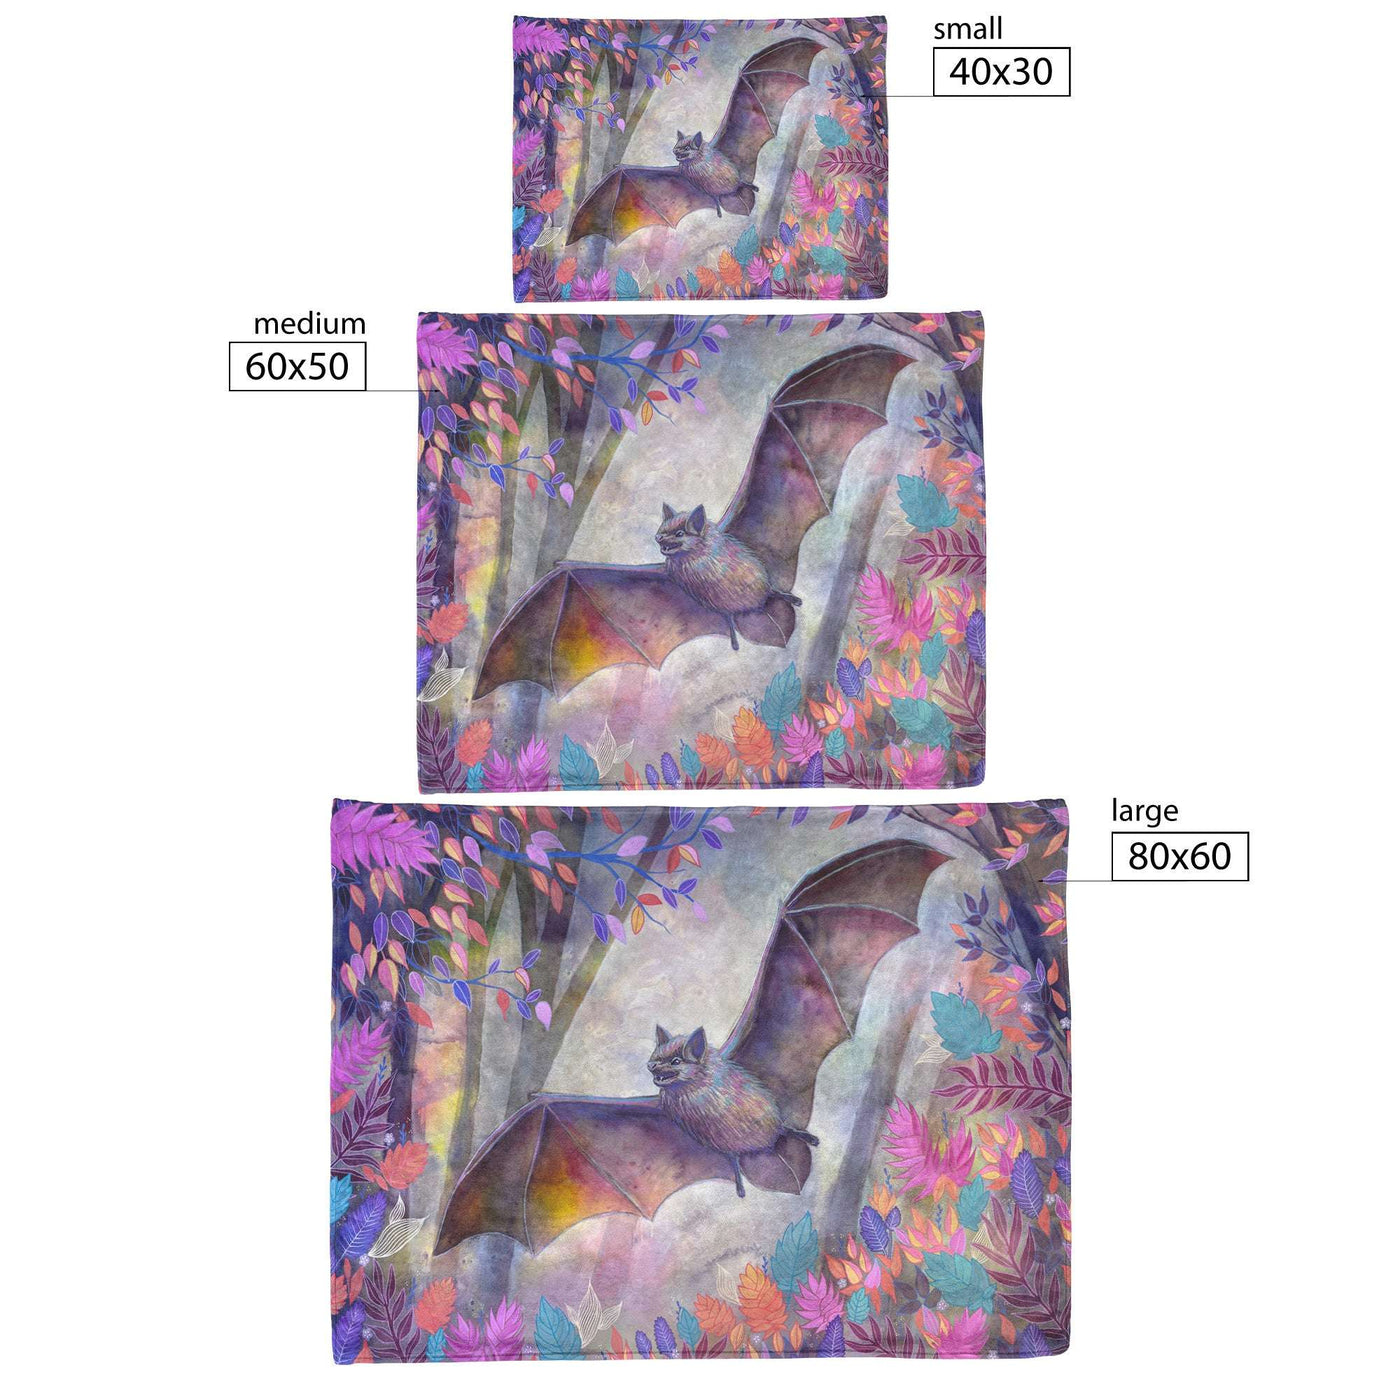 A size comparison of three bat blankets of different sizes depicting an artistic illustration of a bat among colorful foliage.